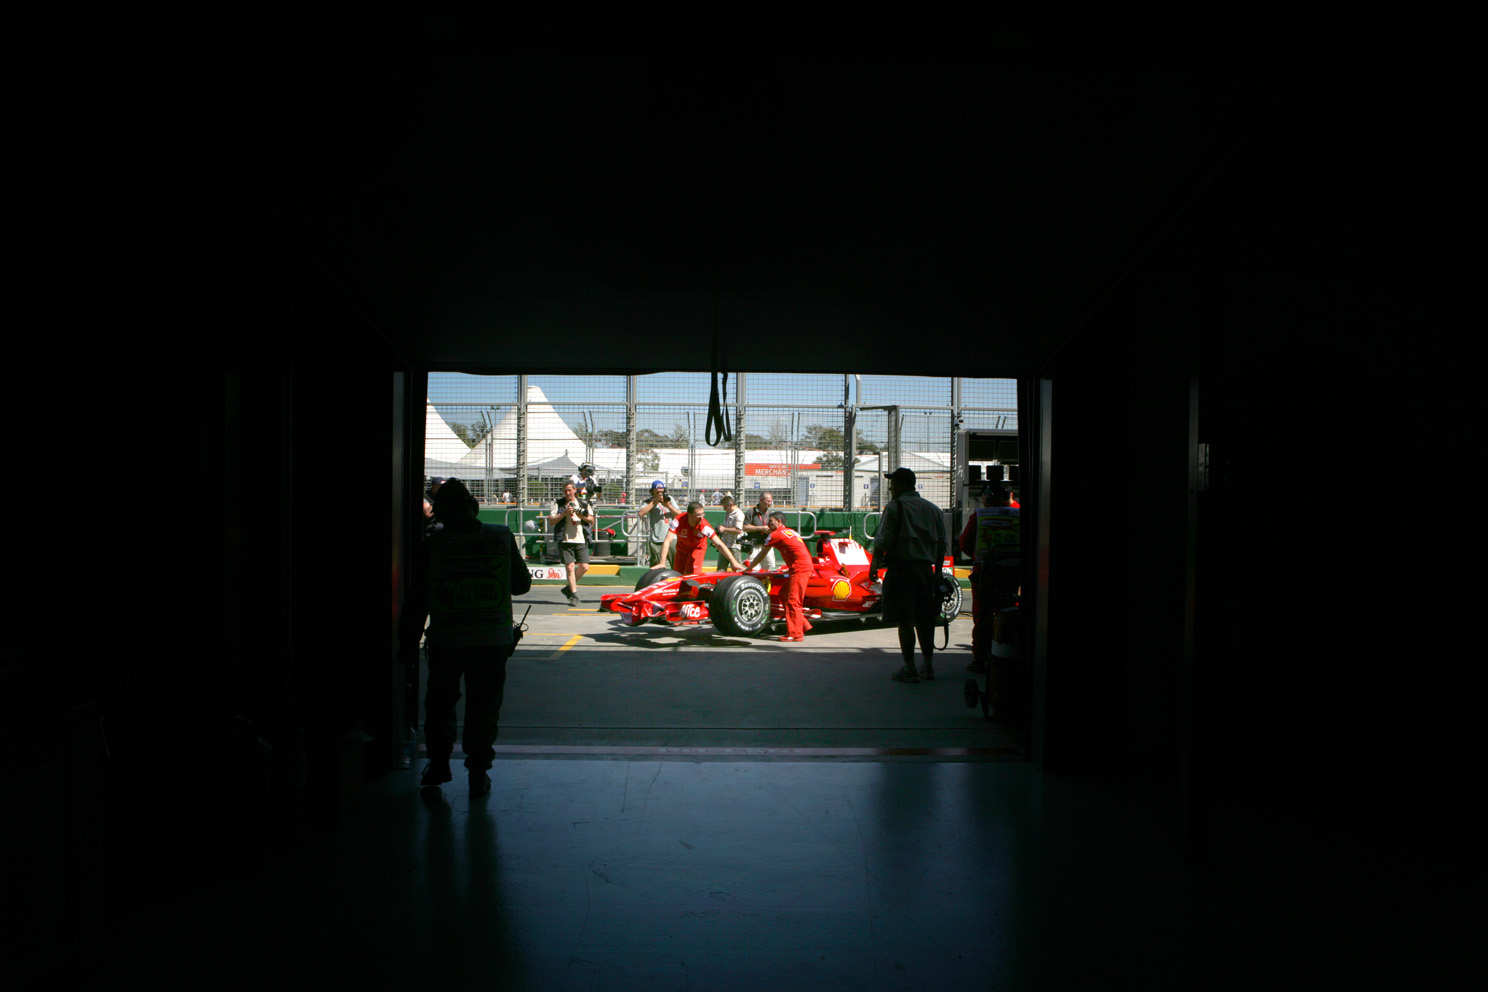 The Ferrari team pushes one of the cars to the scrutineering at the Melbourne Grand Prix 2008